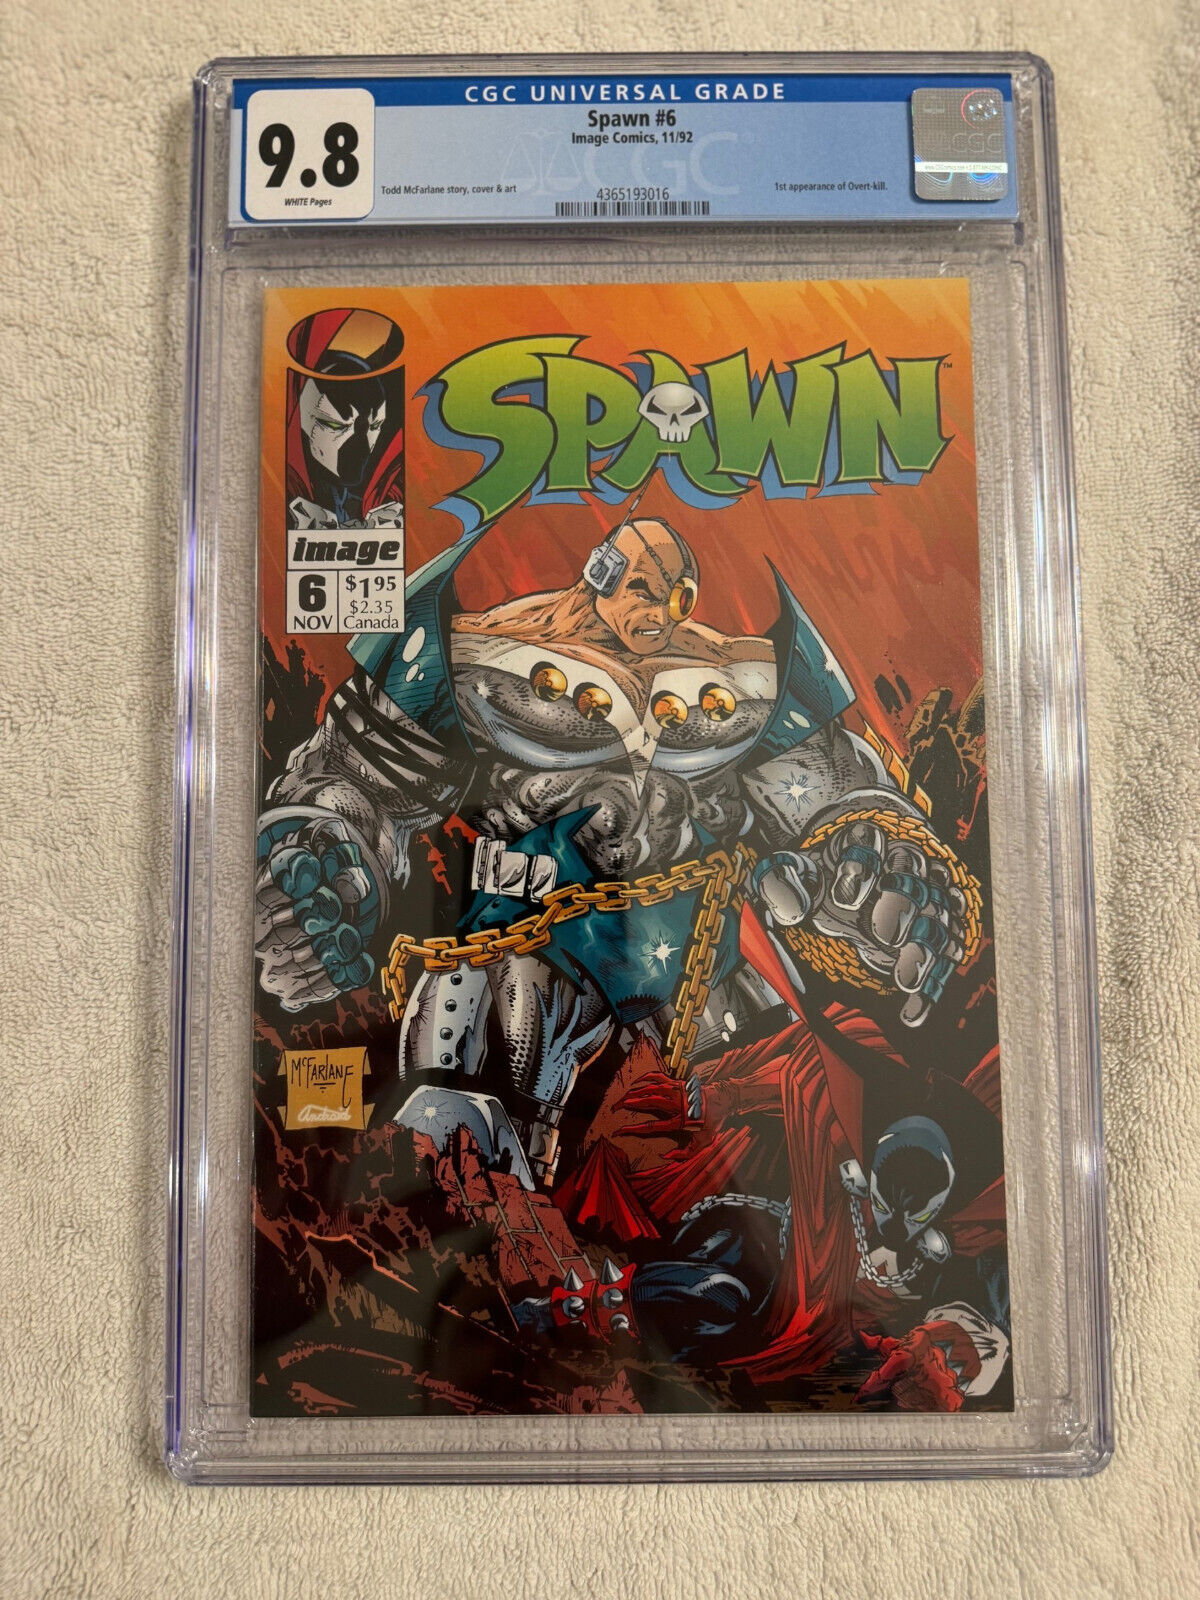 Spawn #6 - CGC 9.8 - White Pages - 1st app. Overt-Kill - Image 1992